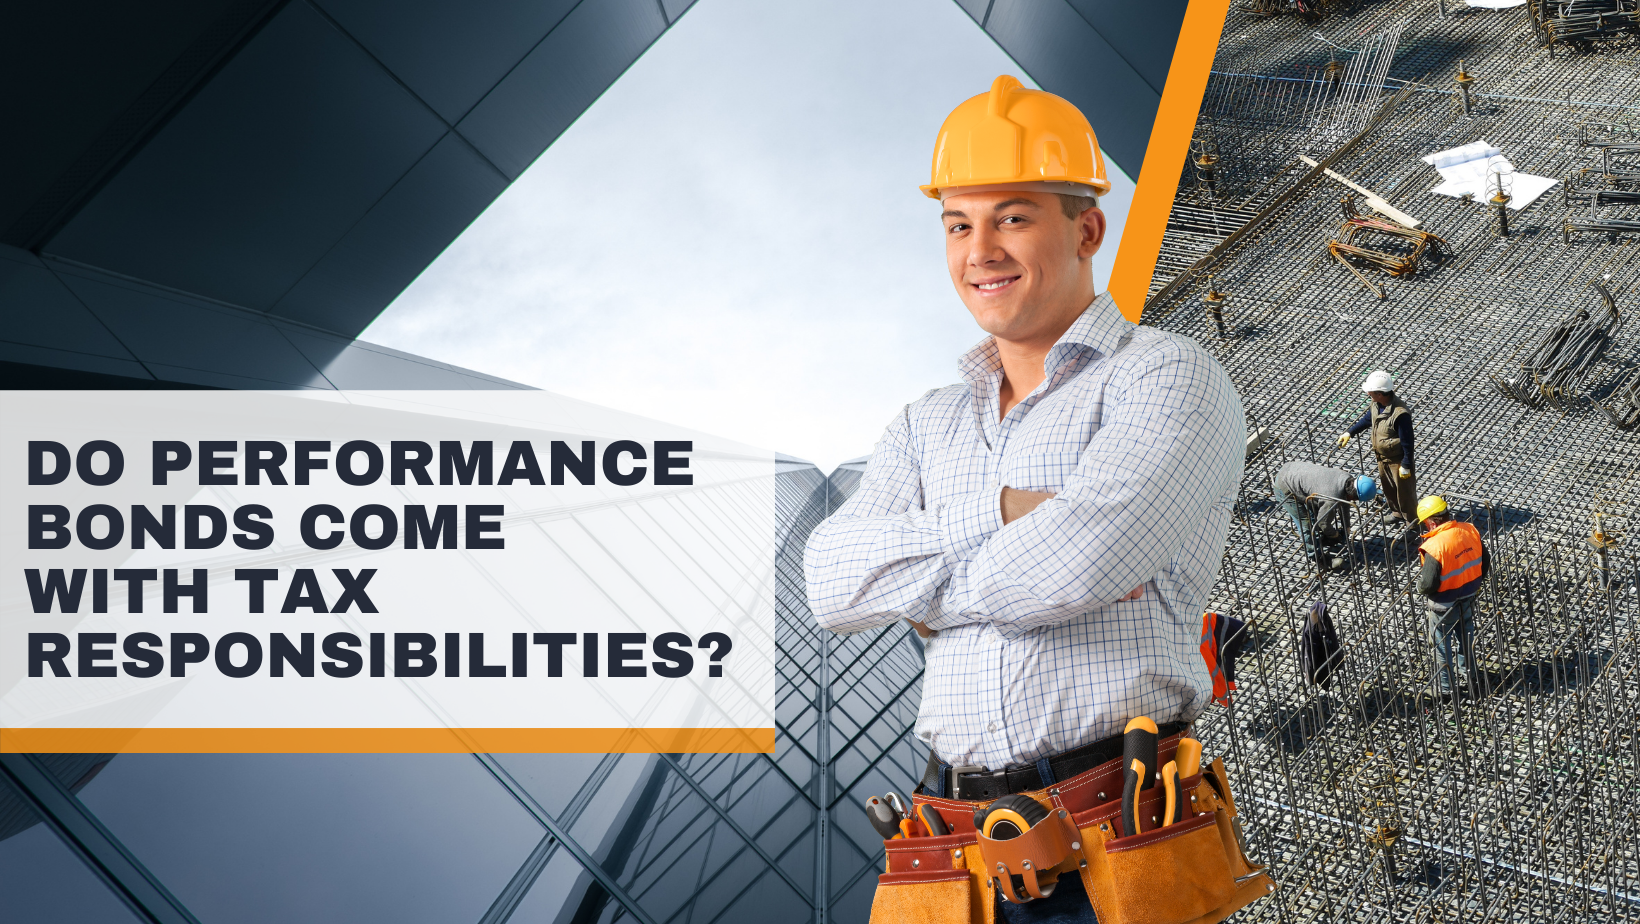 performance bond - Is it possible for performance bonds to be taxed - man in construction gear